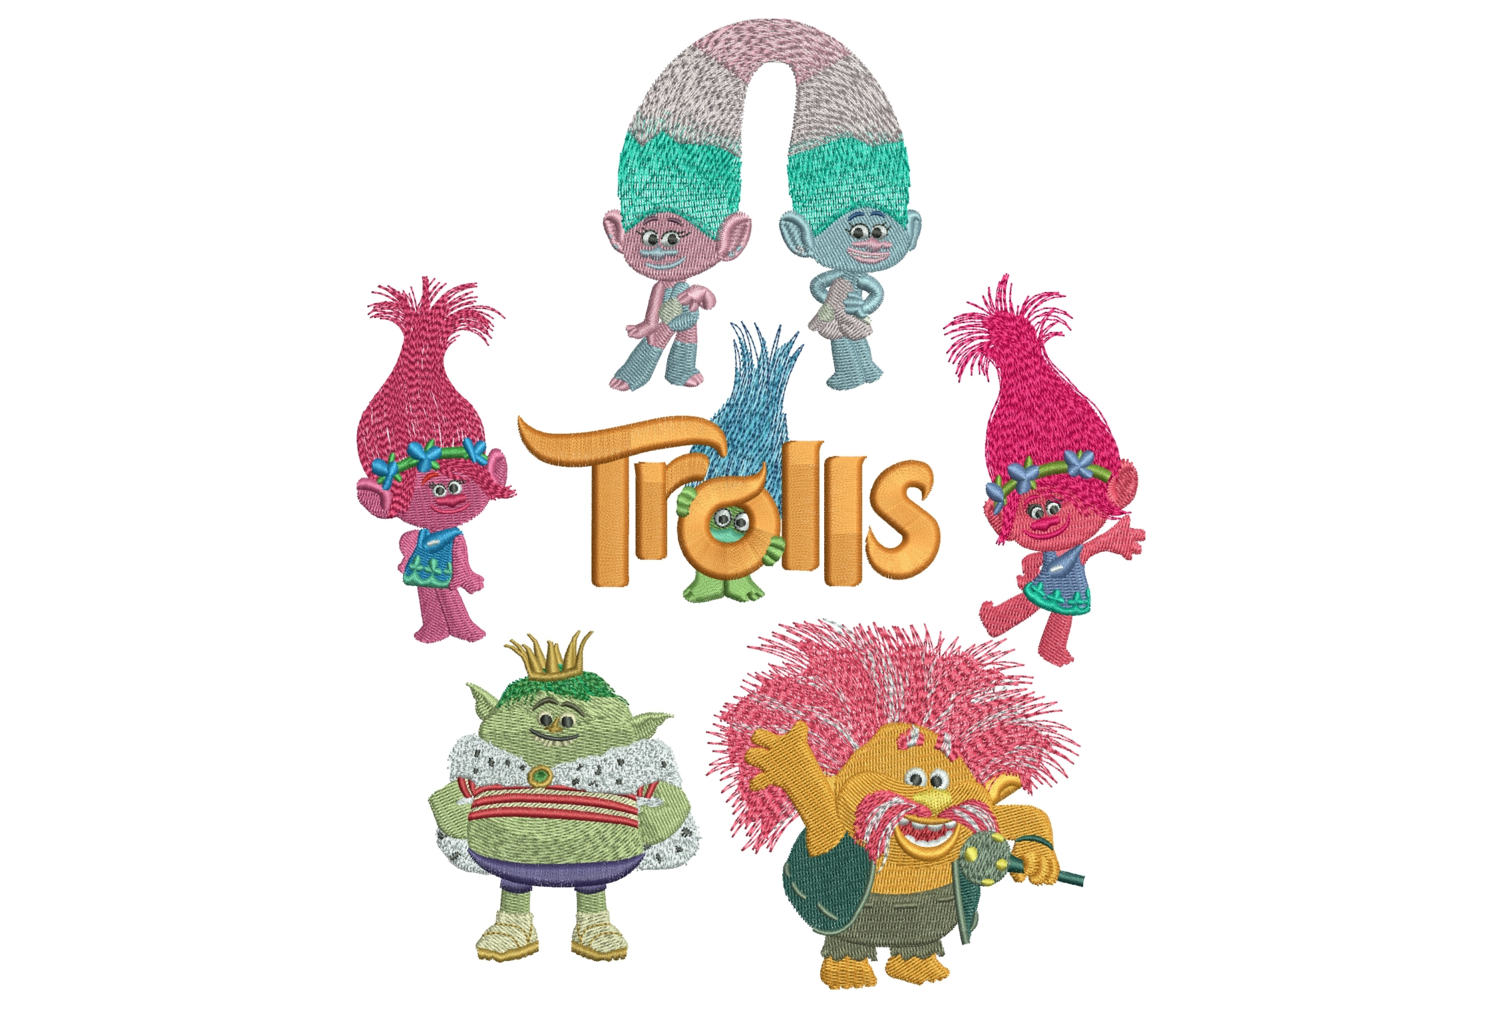 50% off - Trolls machine embroidery designs - 4in hoop - Set No.4 - Trolls Movie Logo, Satin Chenille, 2 Princess Poppy, Peppy and Prince